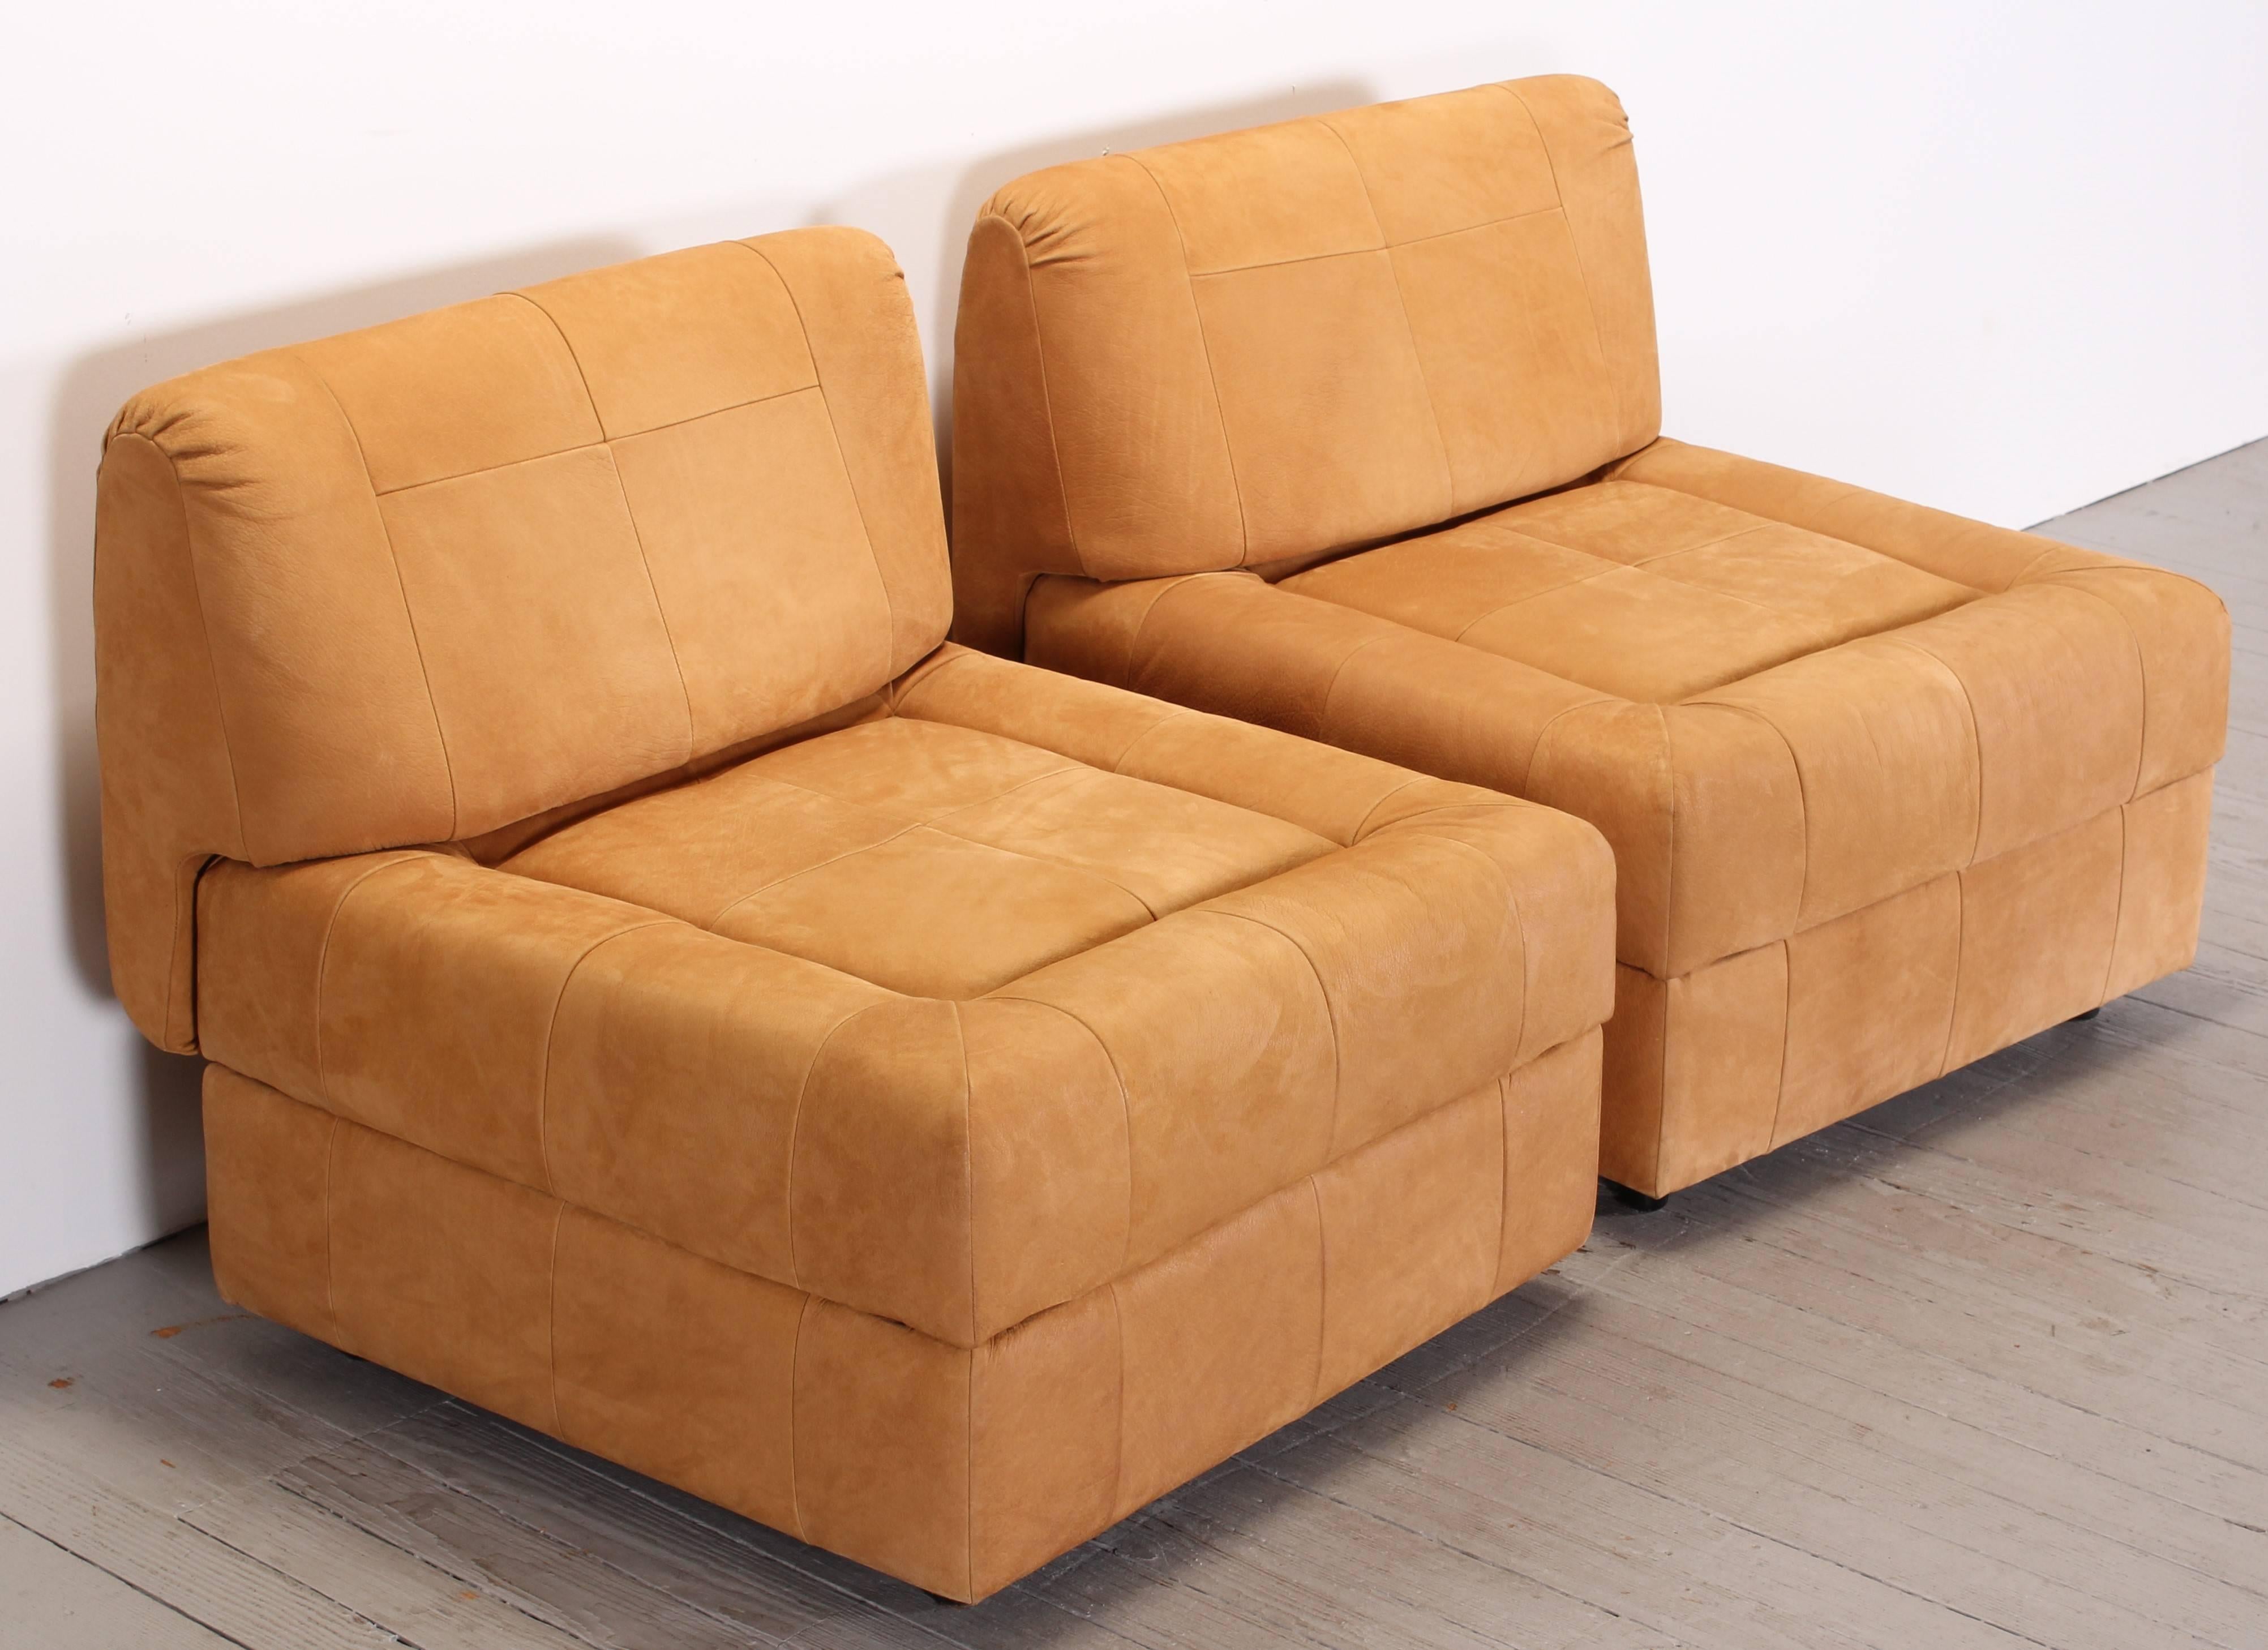 A fabulous pair of Brazilian suede leather lounge chairs, labeled Lafer, 1970. The backs are removable and make a pair of ottomans depending on how you would like to utilize the chairs. Dimensions without backrest 27.50.